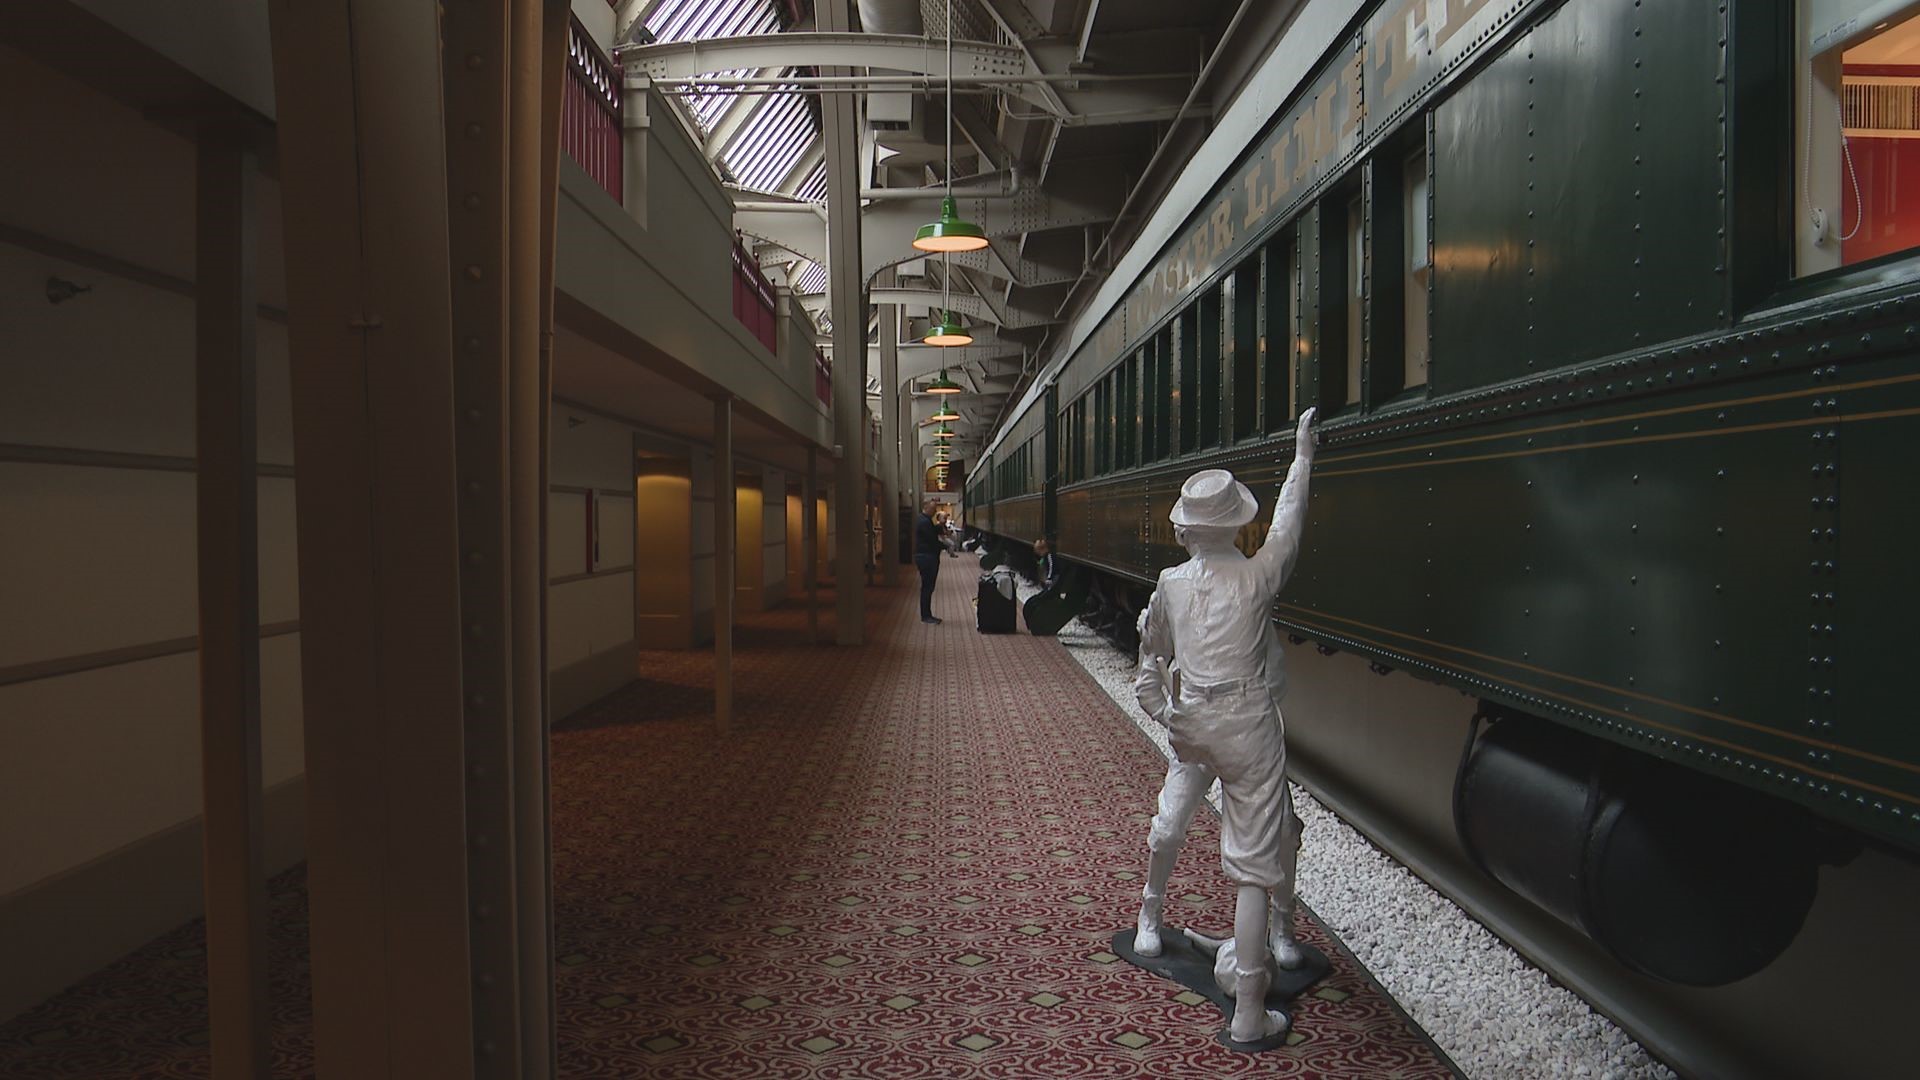 The trains at Crowne Plaza Indianapolis Downtown Union Station haven’t moved in decades, but guests can take a trip back in time and stay inside a train car.